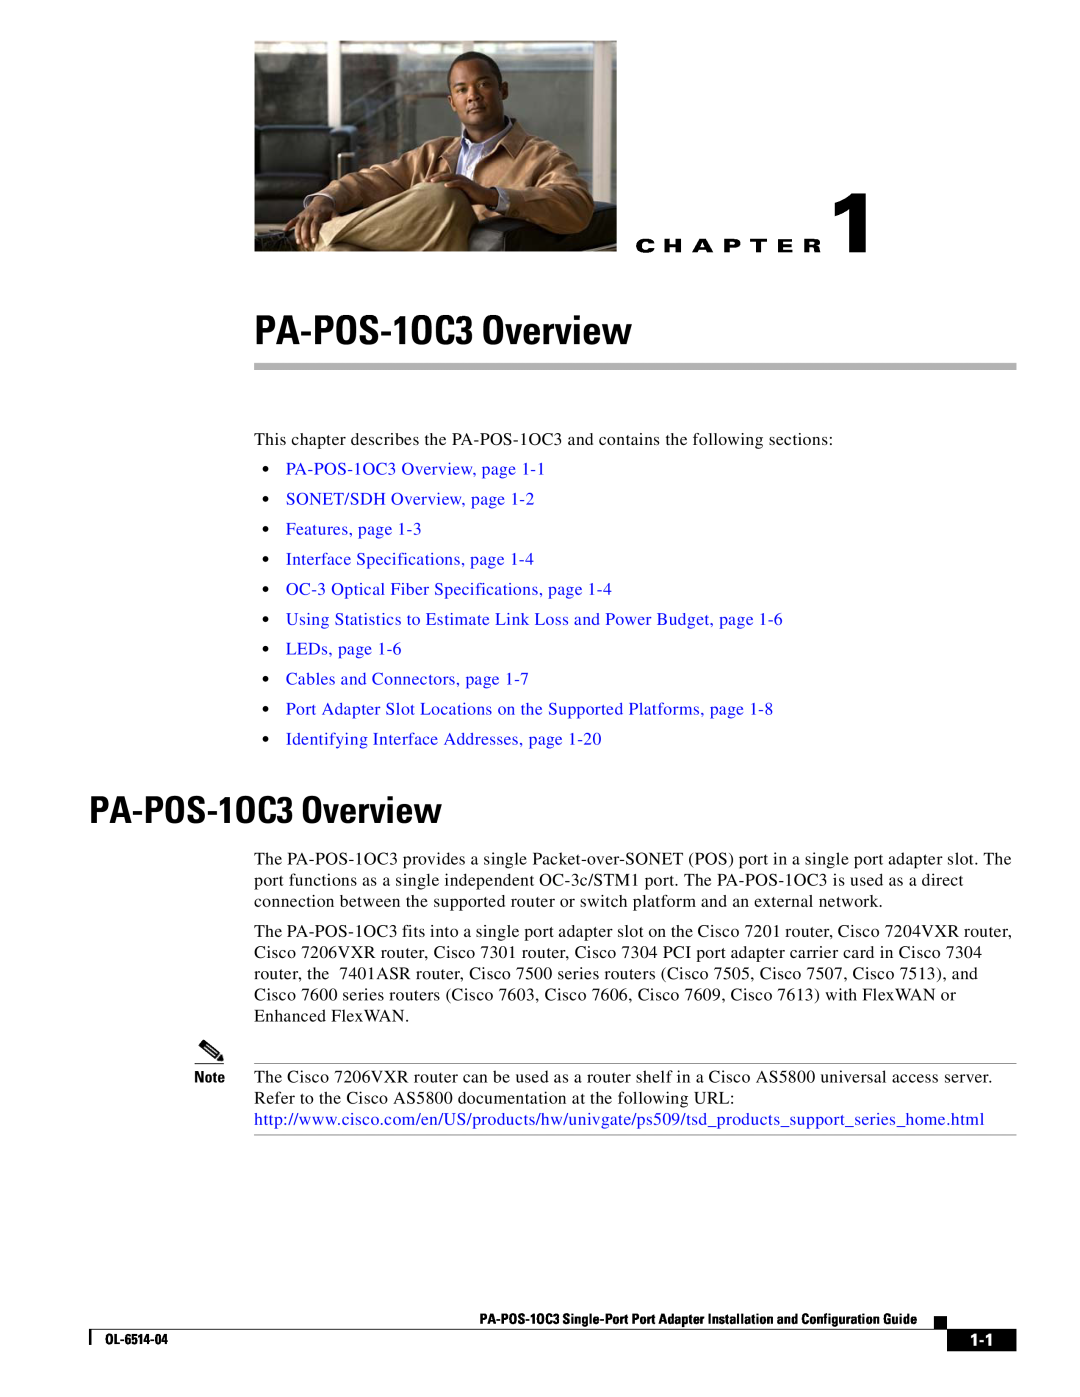 Cisco Systems PA-POS-2OC3 manual C H A P T E R, PA-POS-1OC3 Overview, page SONET/SDH Overview, page Features, page 